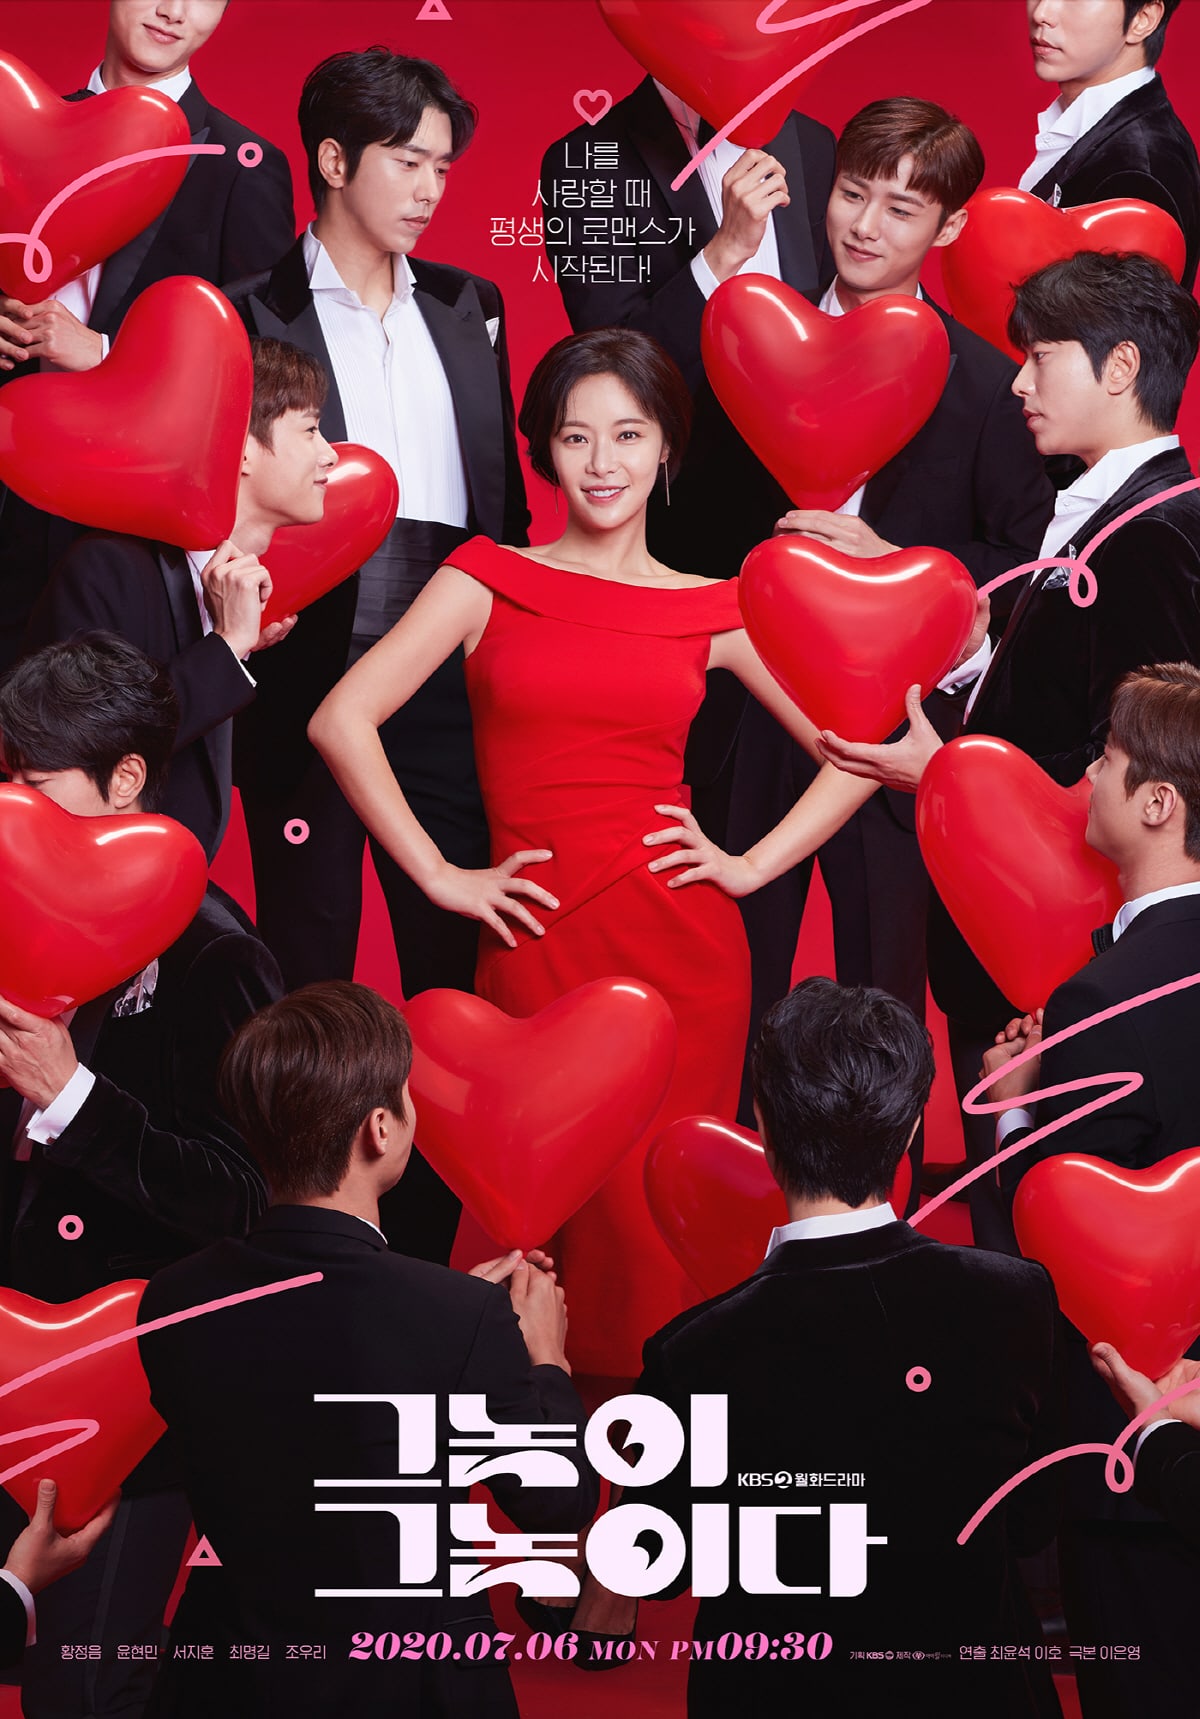 to-all-the-guys-who-loved-me-releases-main-poster-about-choice-of-hwang-jung-eum-1